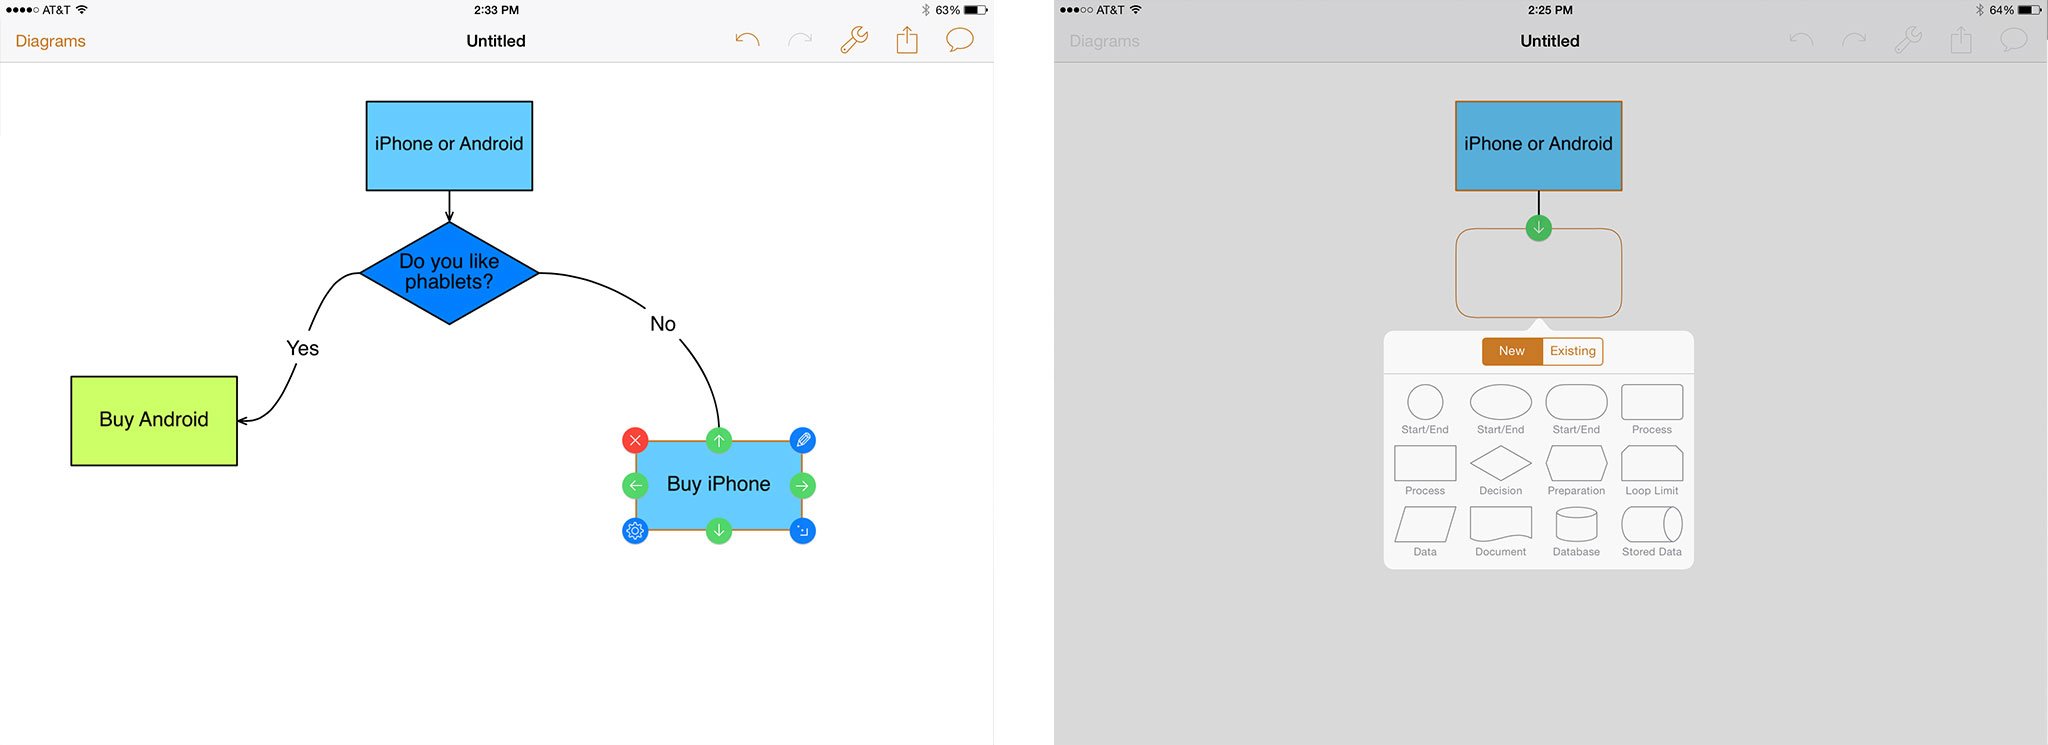 Best flowchart and diagram apps for iPad: PureFlow